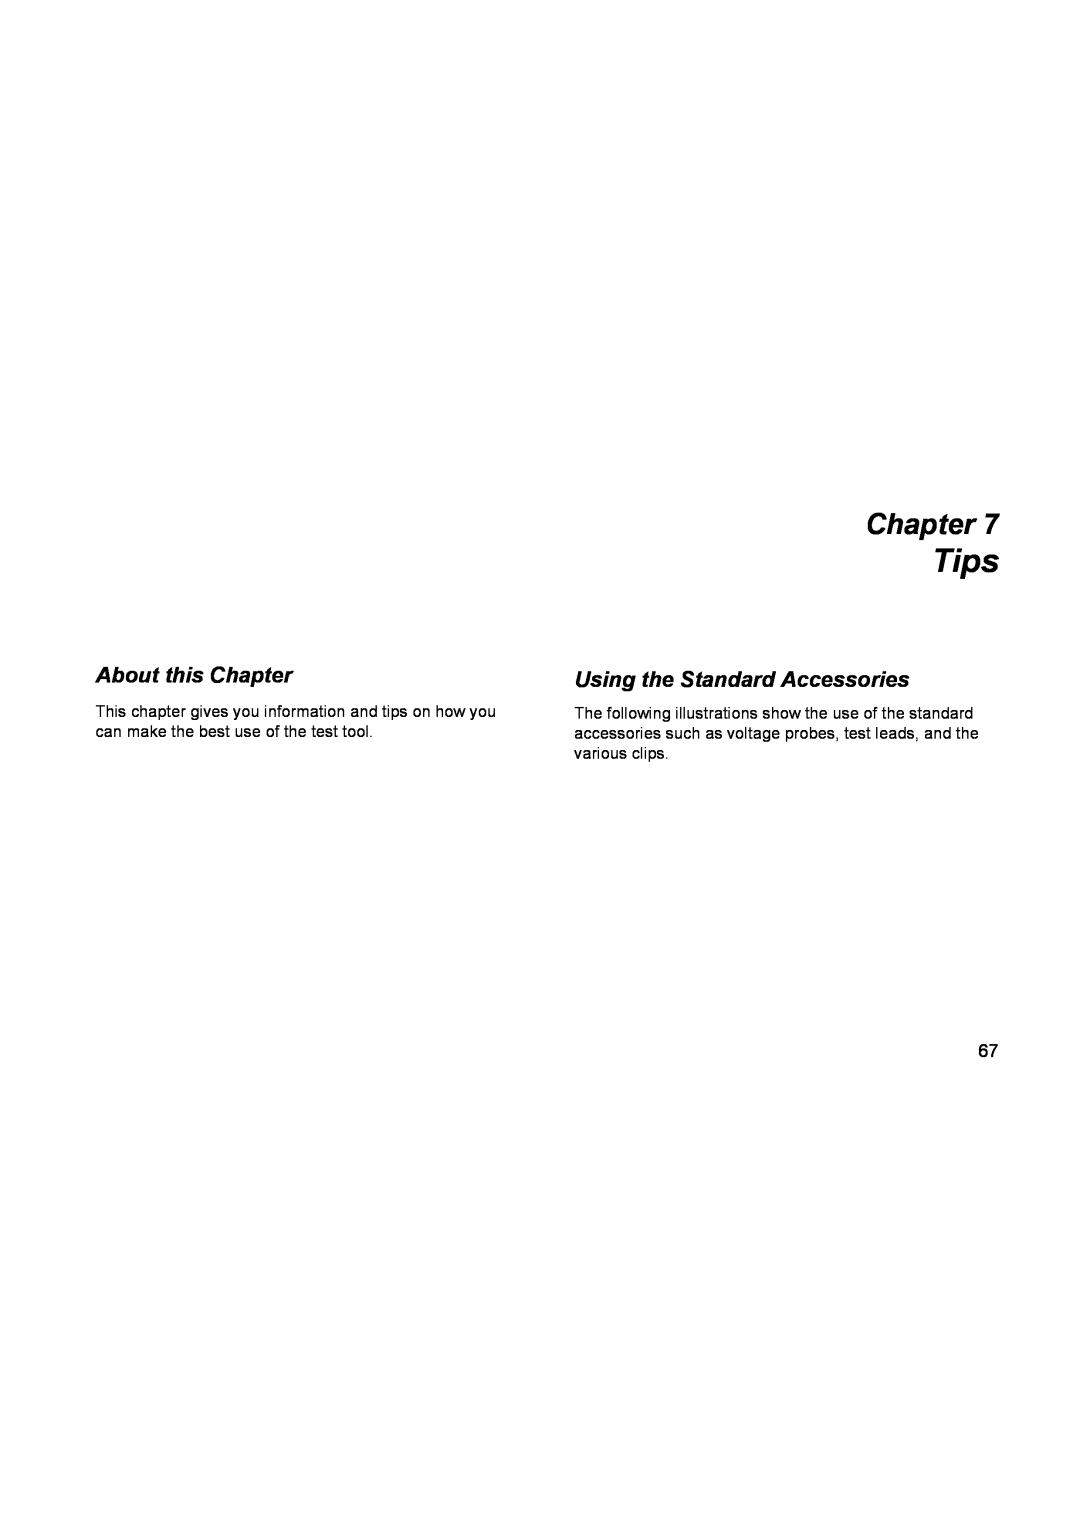 Fluke 196C user manual Tips, Using the Standard Accessories, About this Chapter 